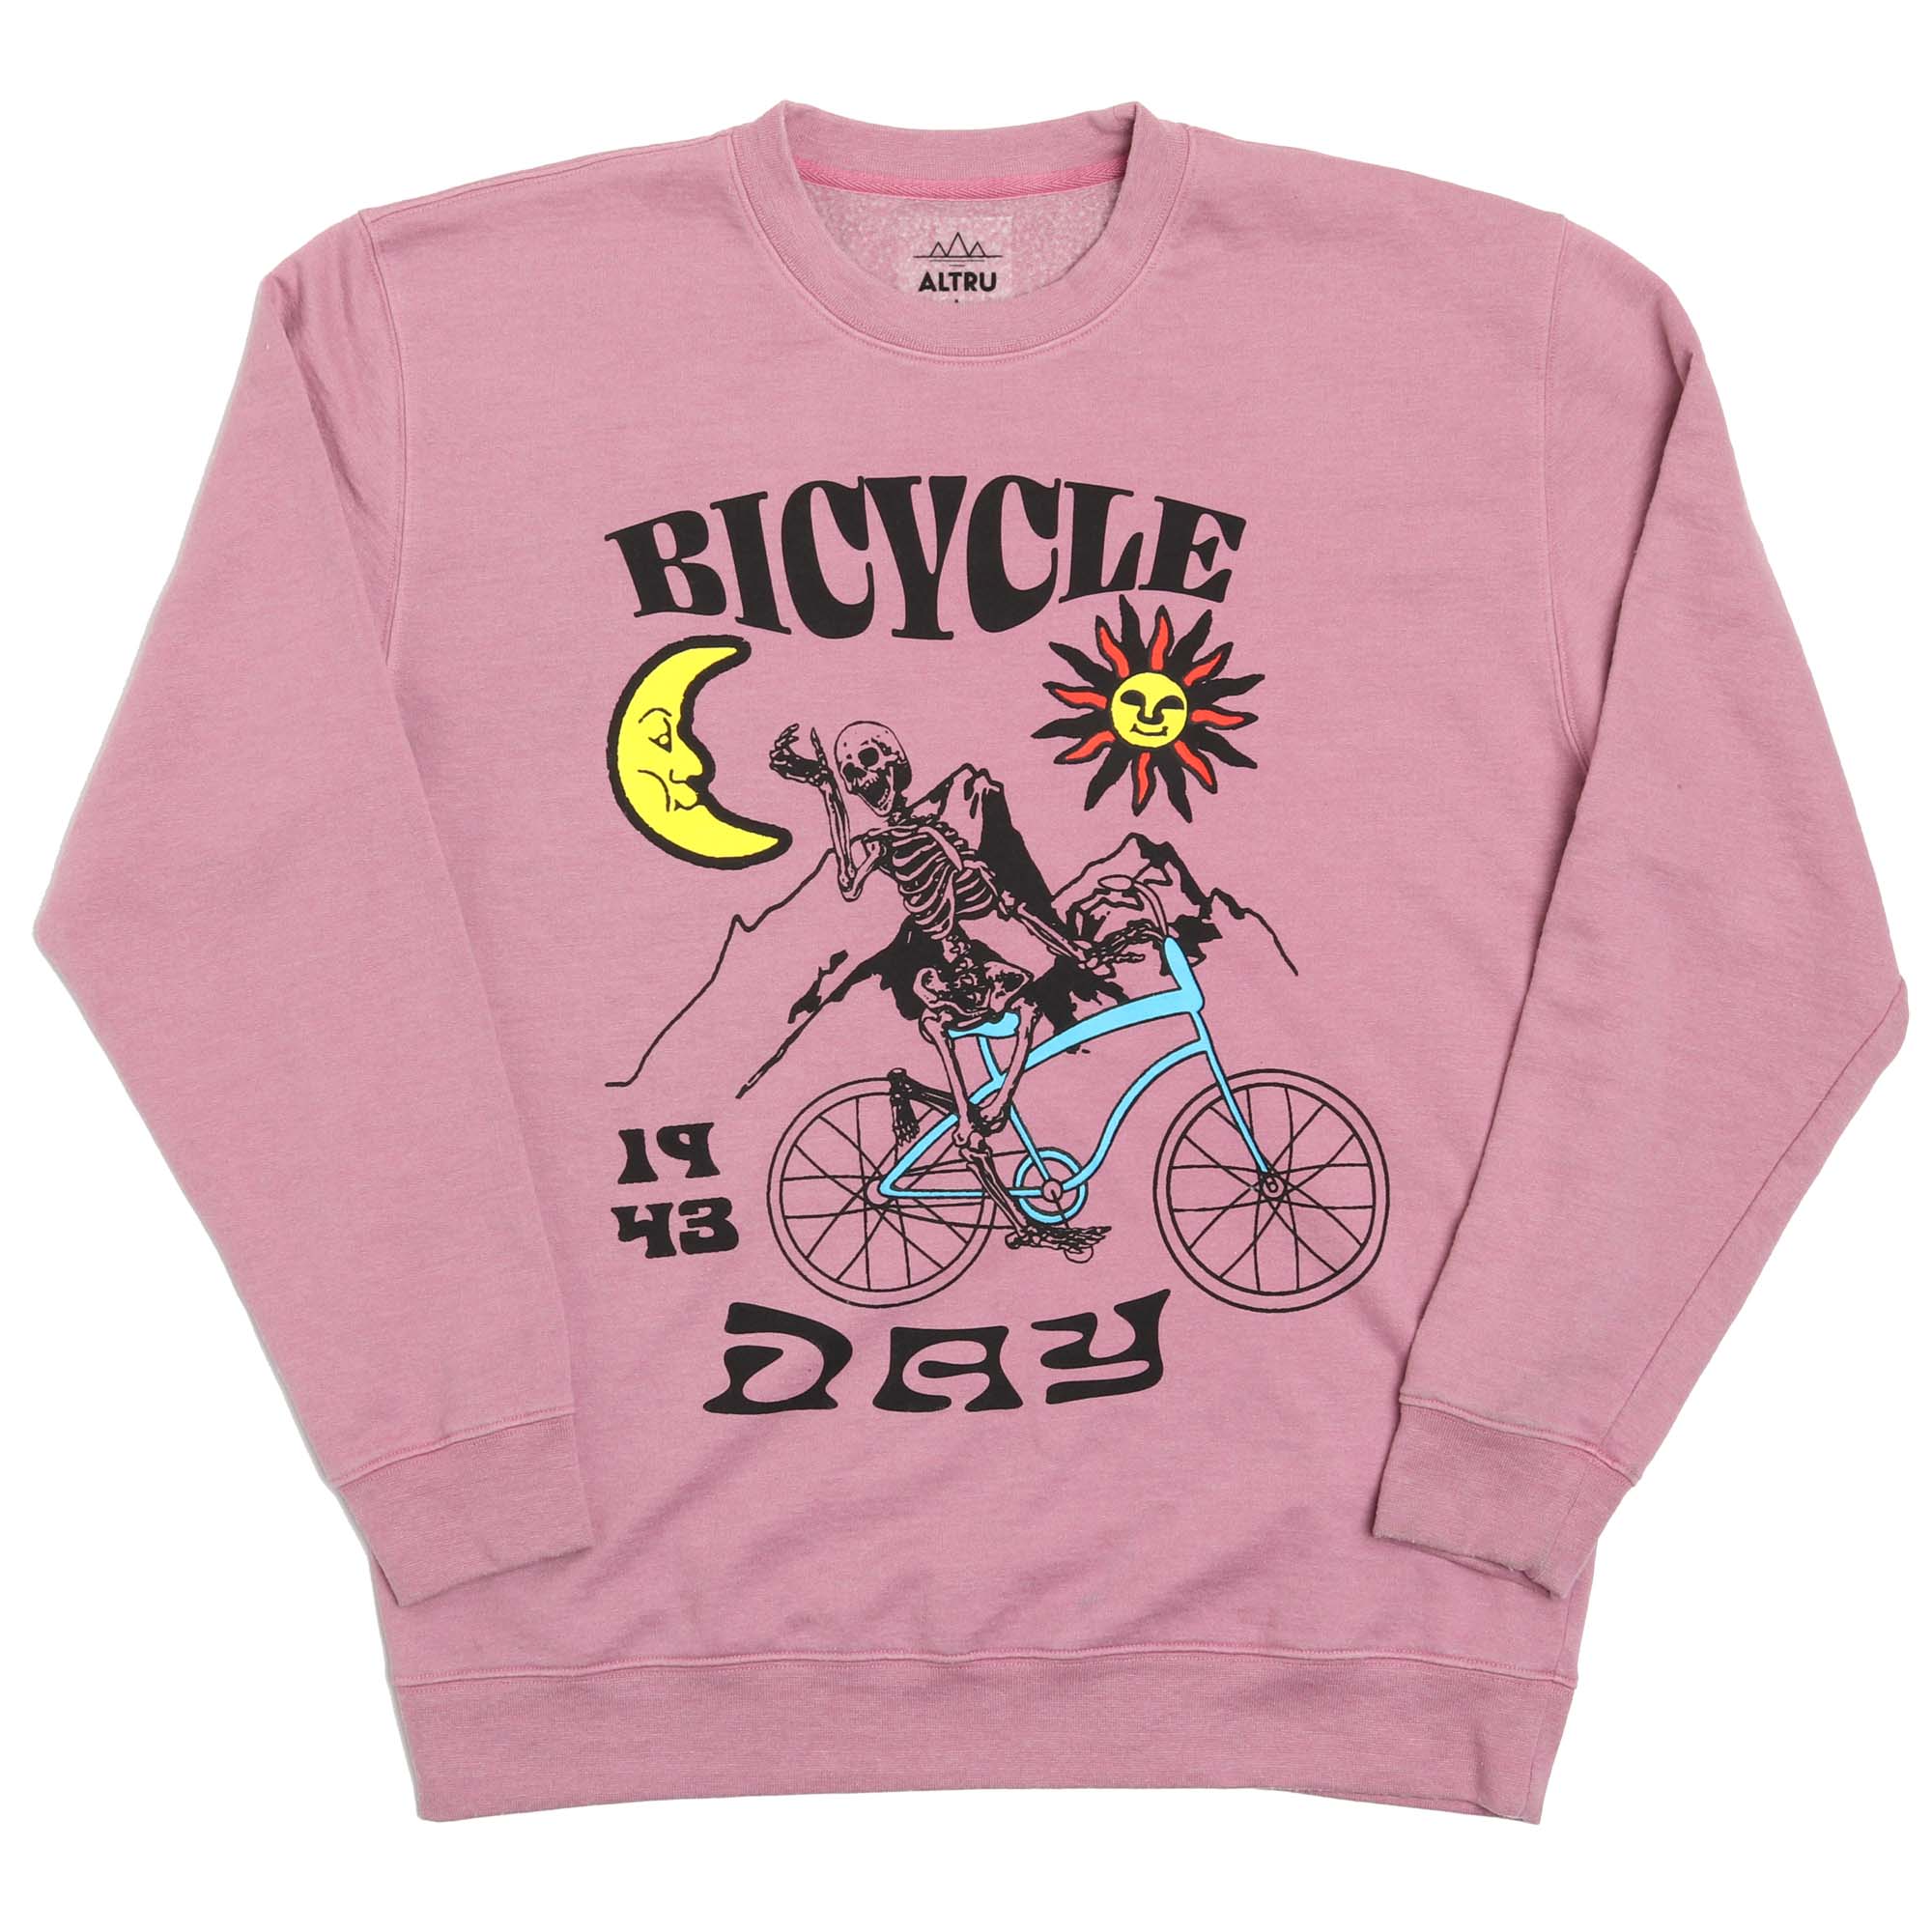 Altru mens purple pink fleece sweatshirt with a skeloton riding a bicycle graphic on front 